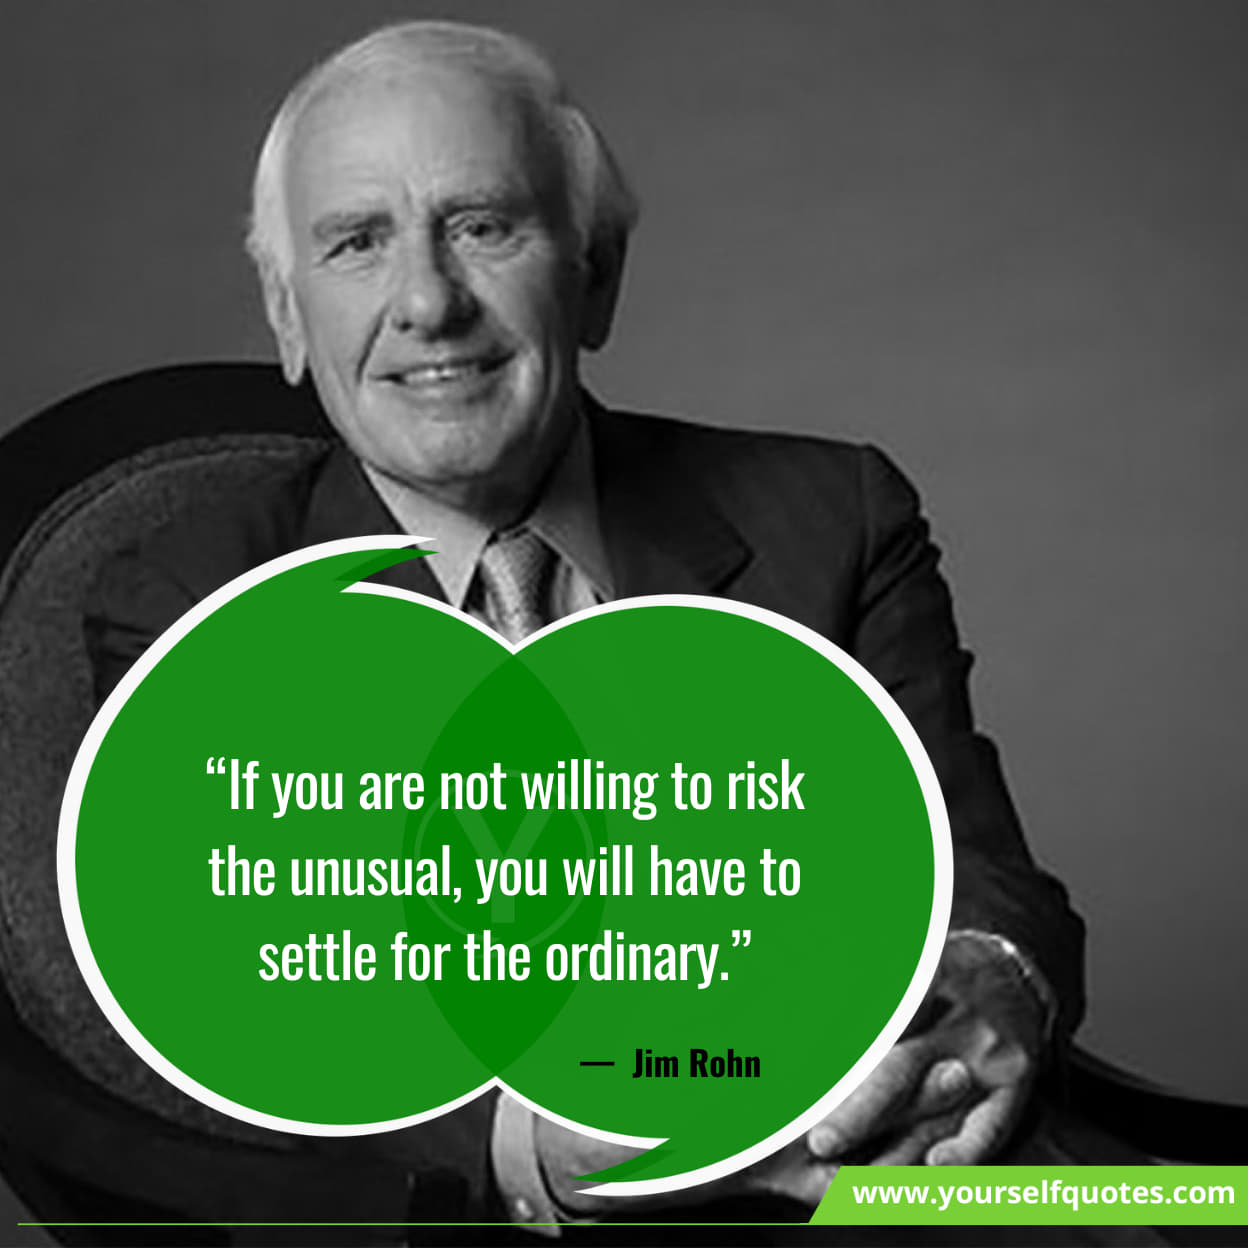 Quotes By Jim Rohn 